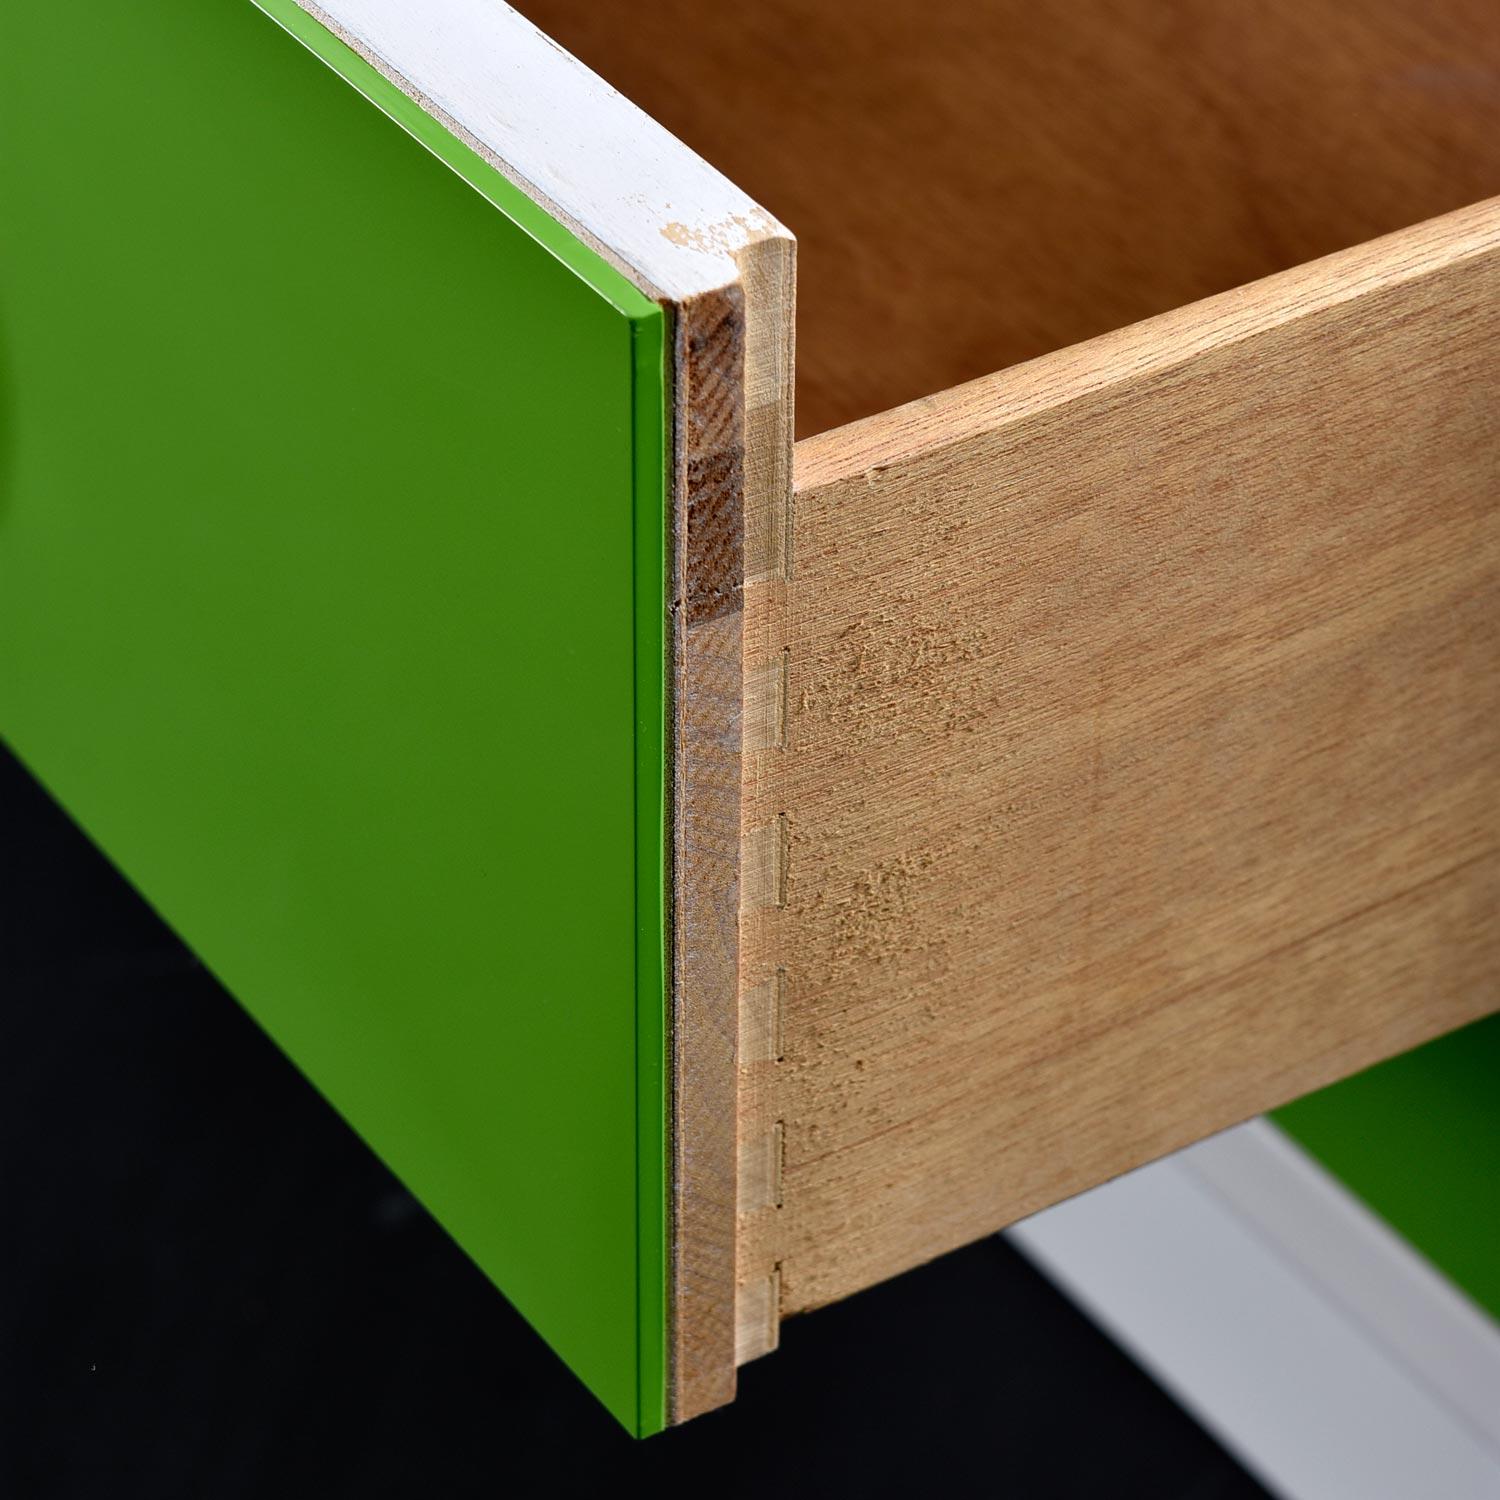 American Pair of Raymond Loewy Inspired Green Chapter One Nightstands by Broyhill Premier